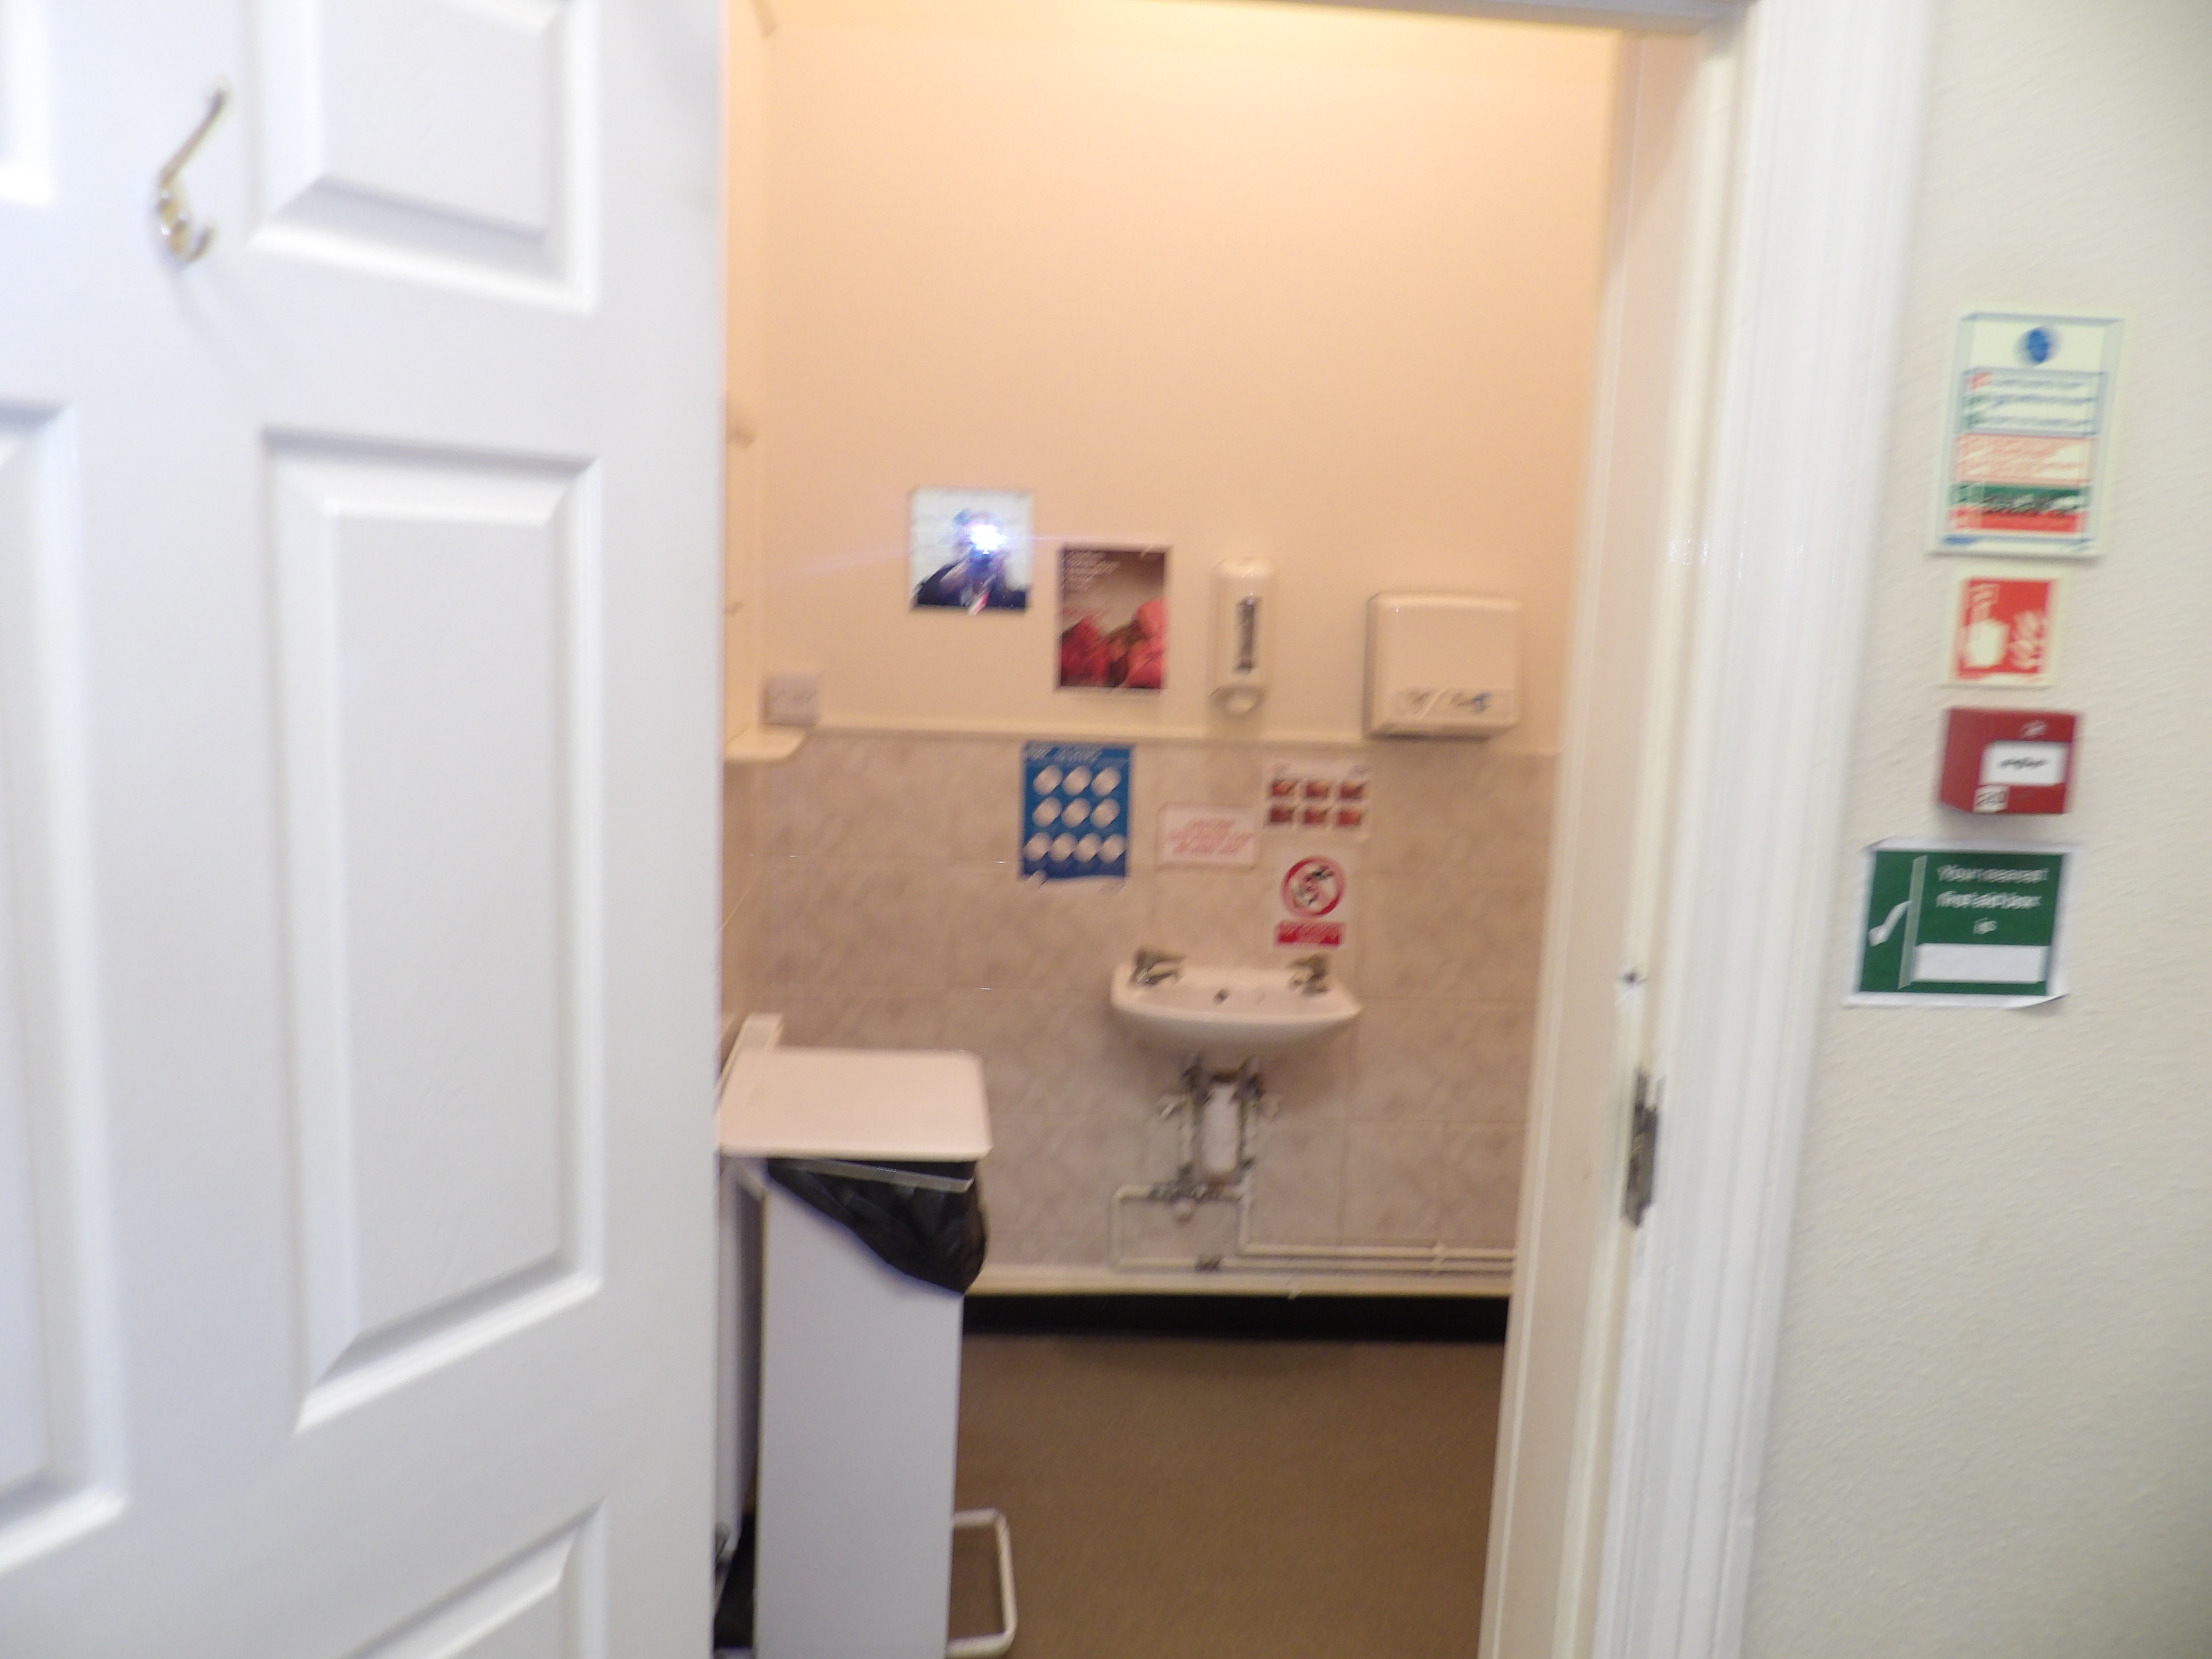 We have an accessible toilet